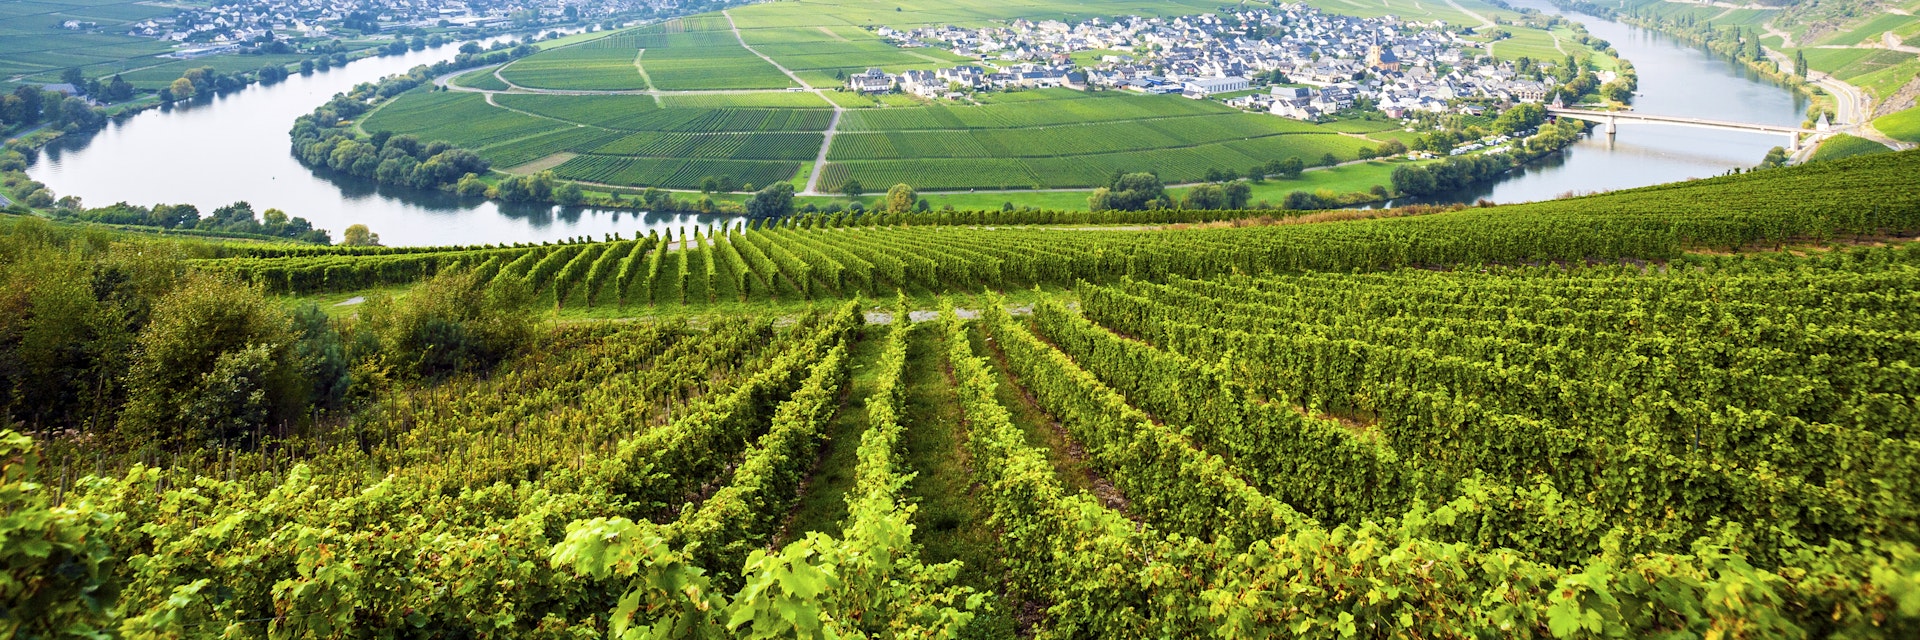 famous Moselle Sinuosity with vineyards